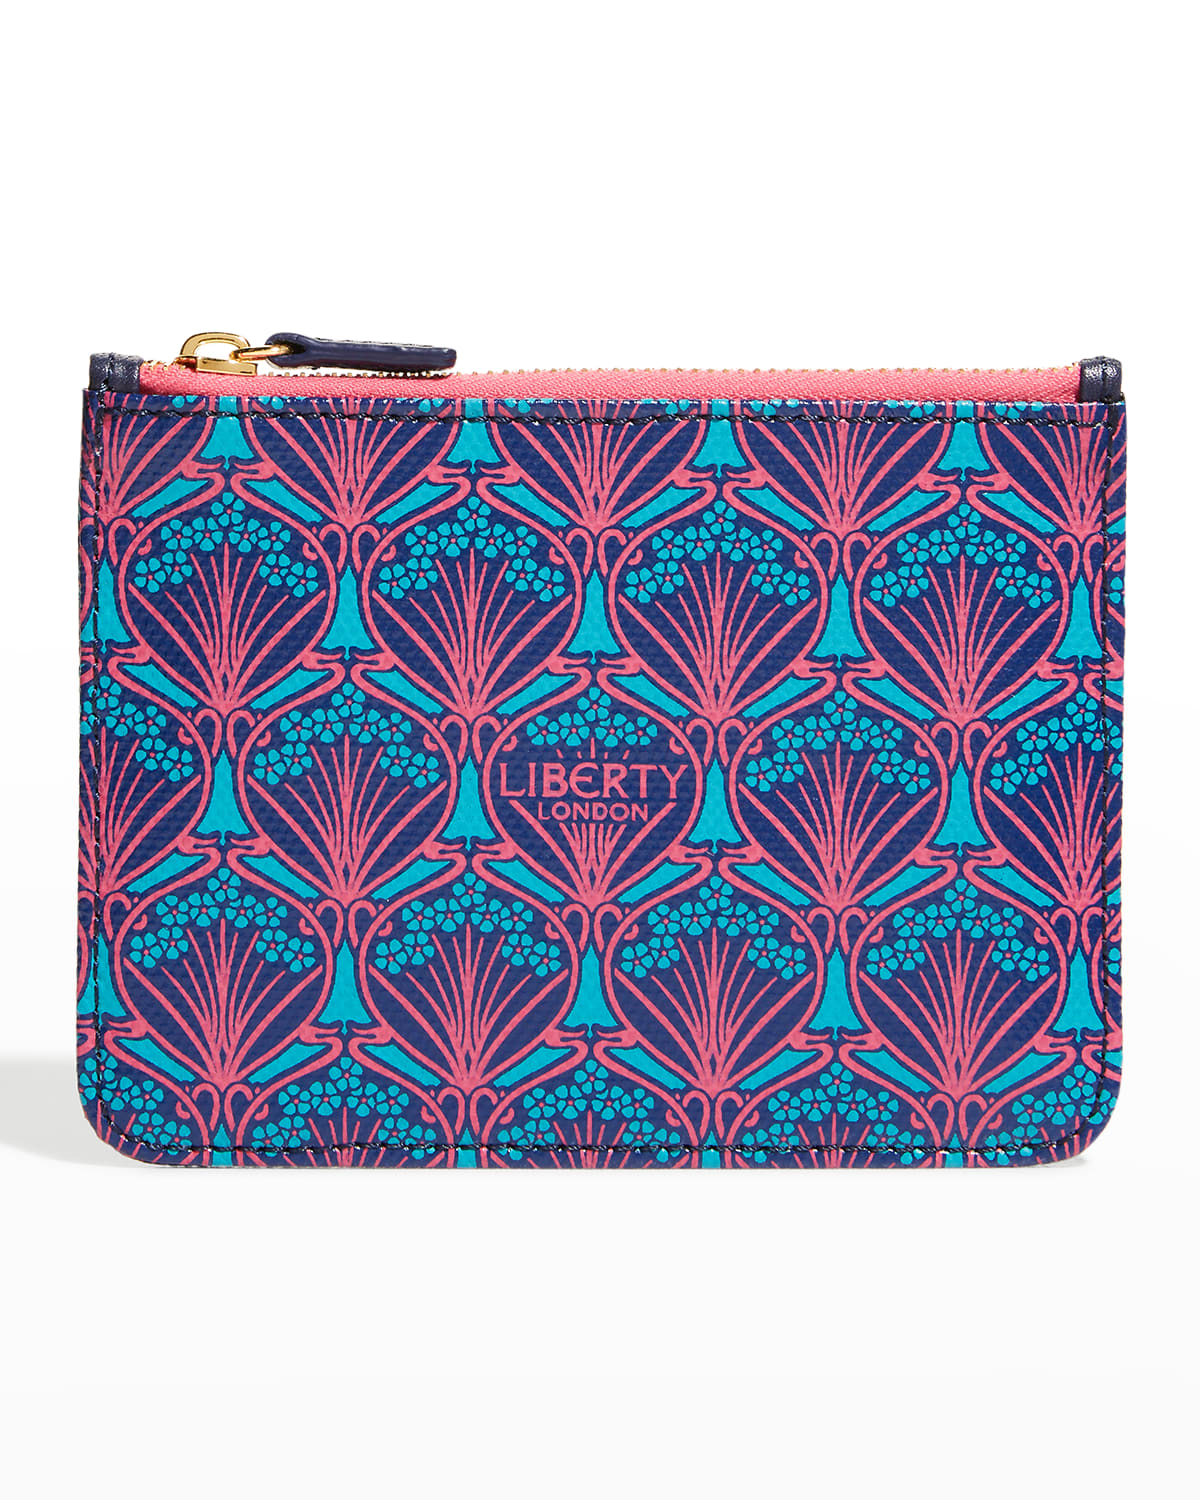 Liberty London Iphis Printed Zip Coin Pouch